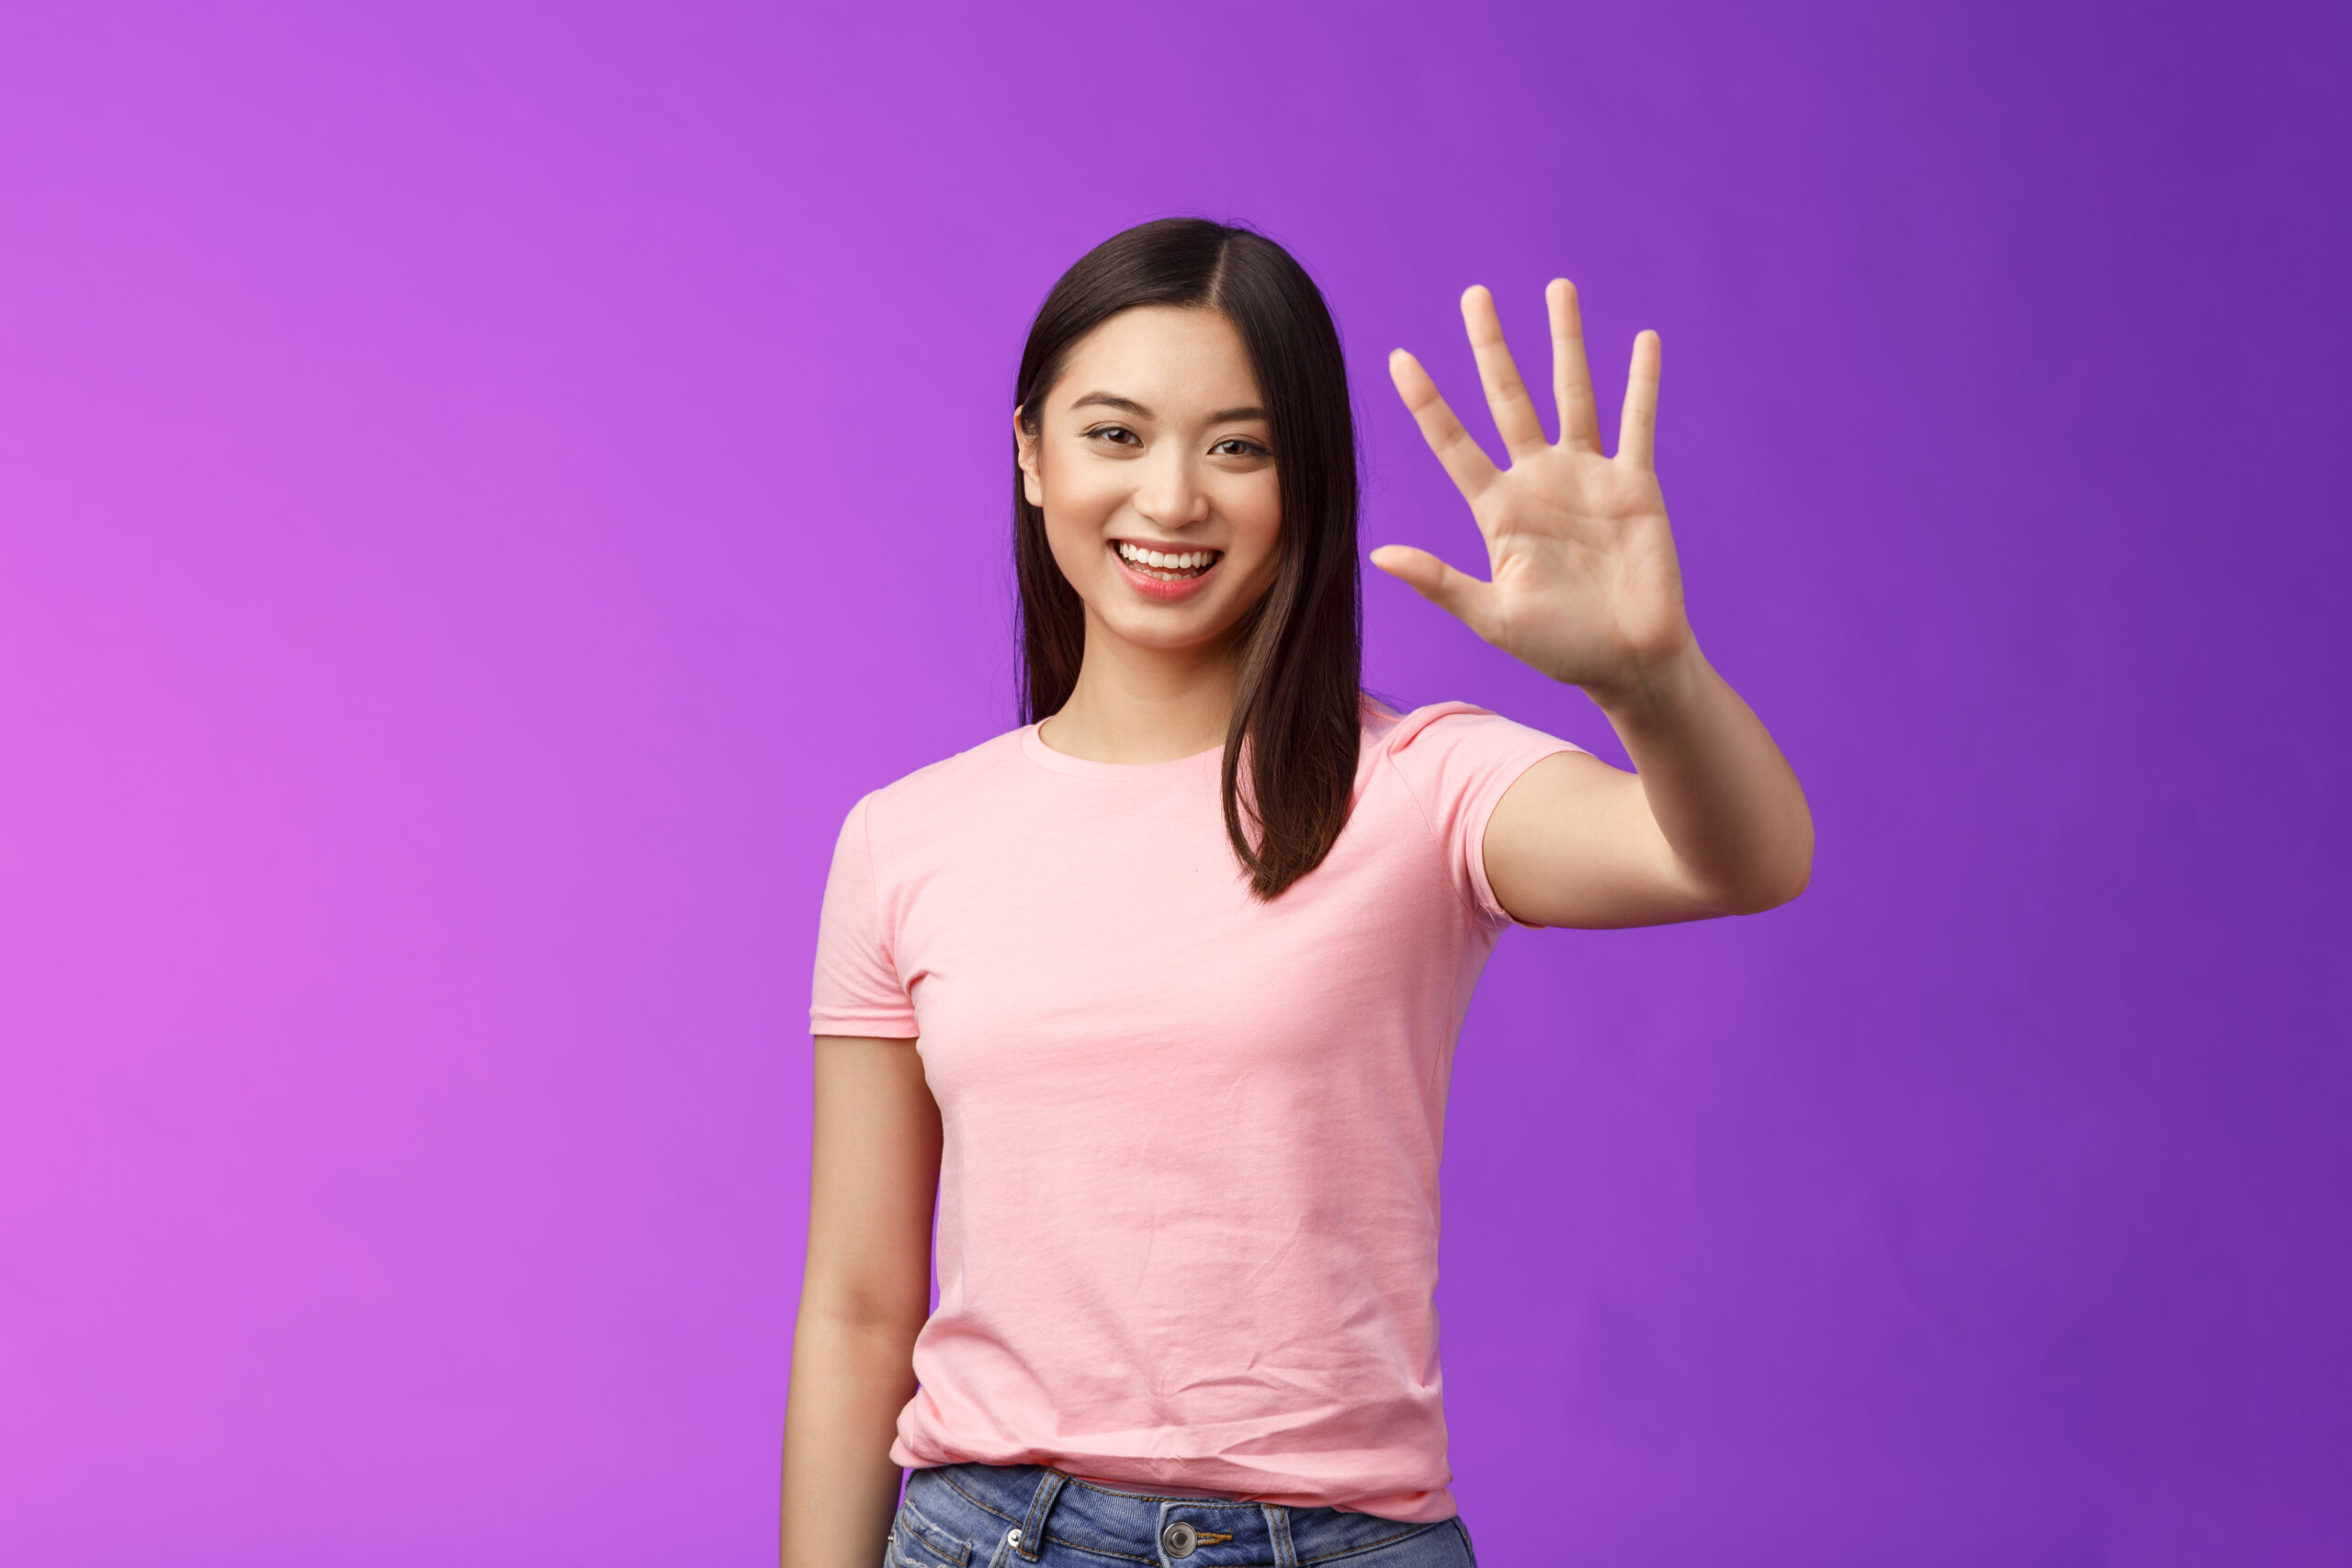 asain woman holding up five fingers and smiling against a purple background, representing 5 reasons to go to outpatient substance use treatment